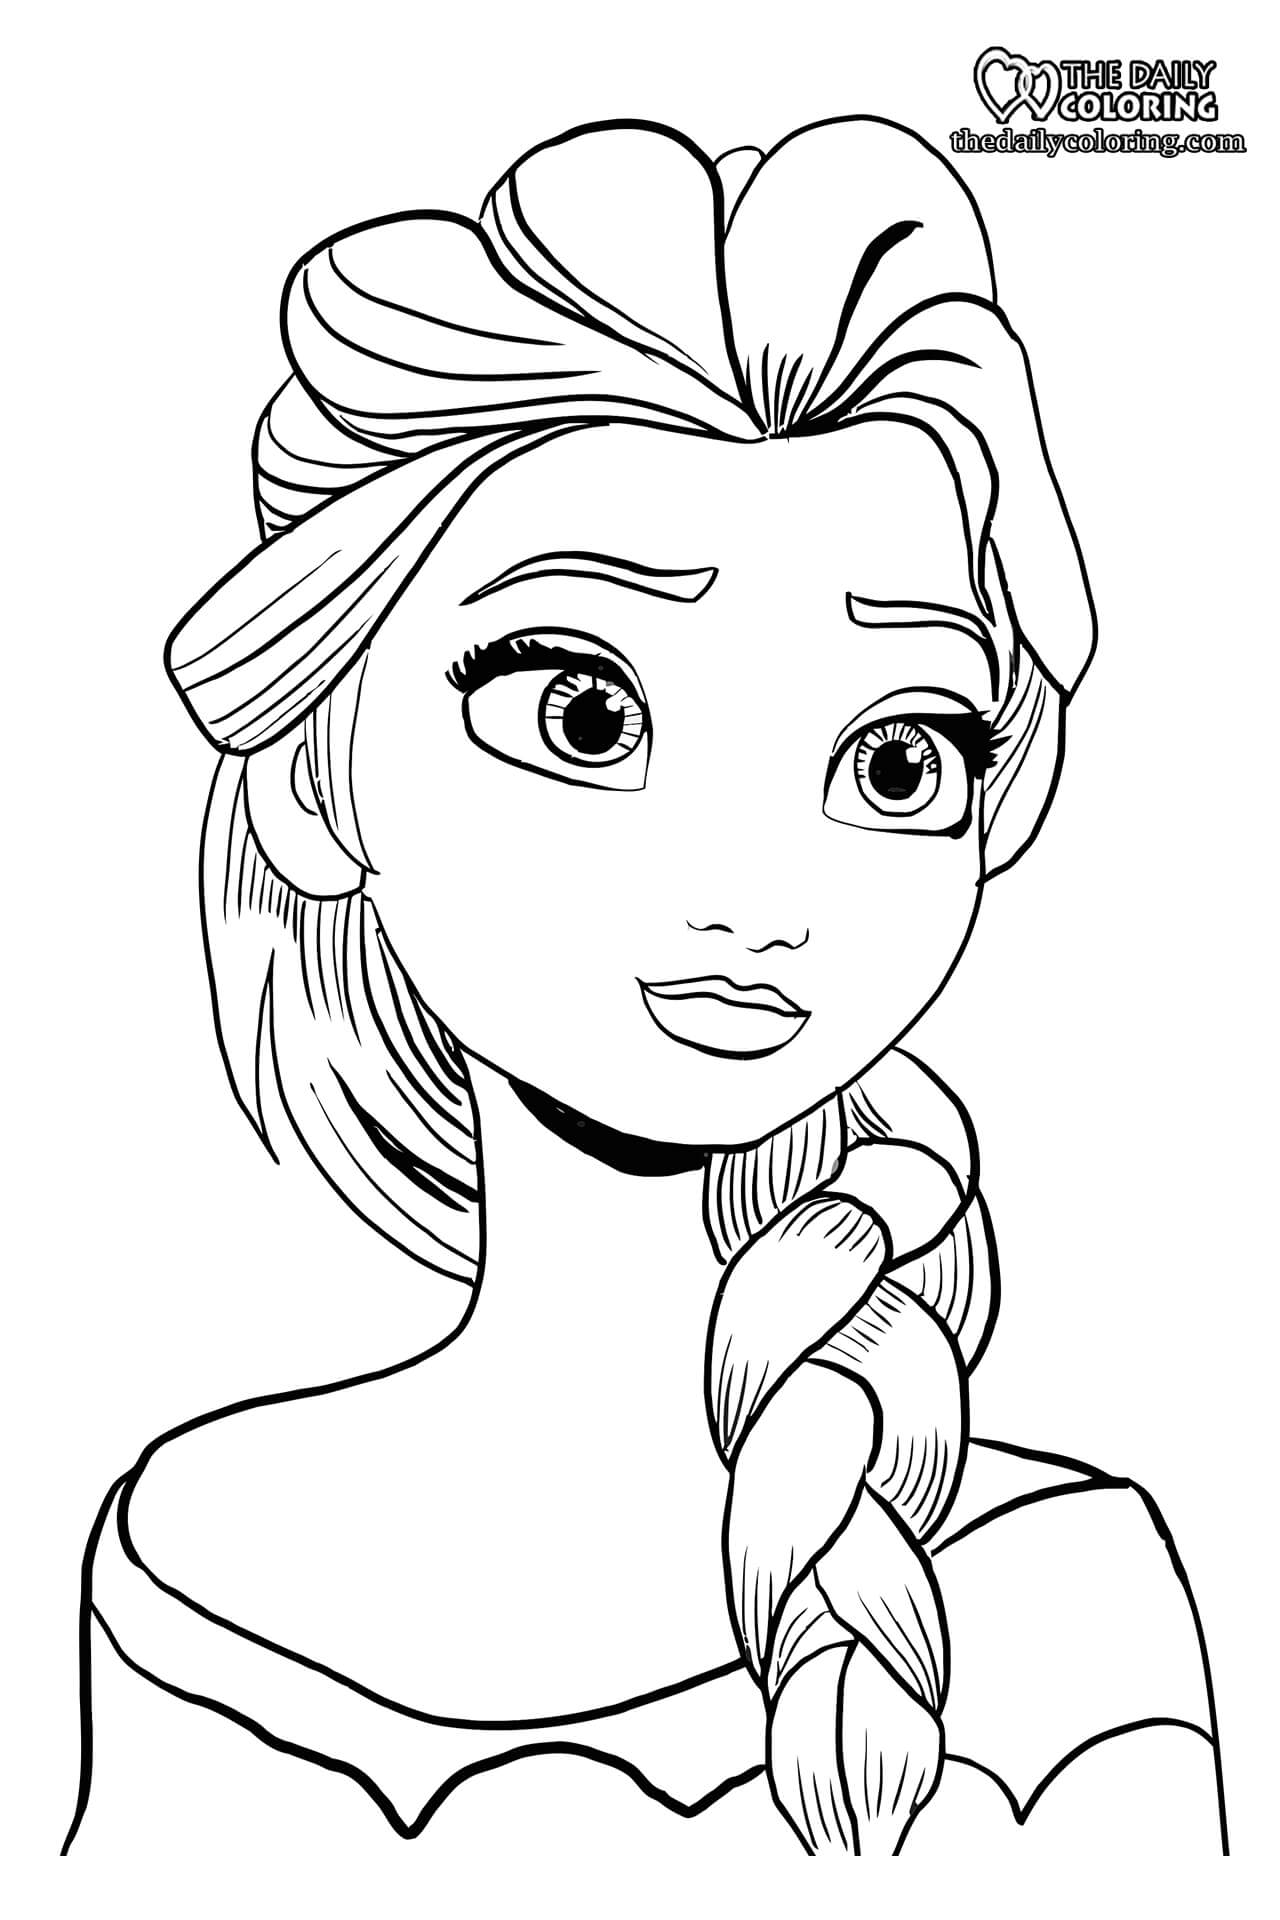 Elsa and Anna Coloring Pages [ Pages] - The Daily Coloring